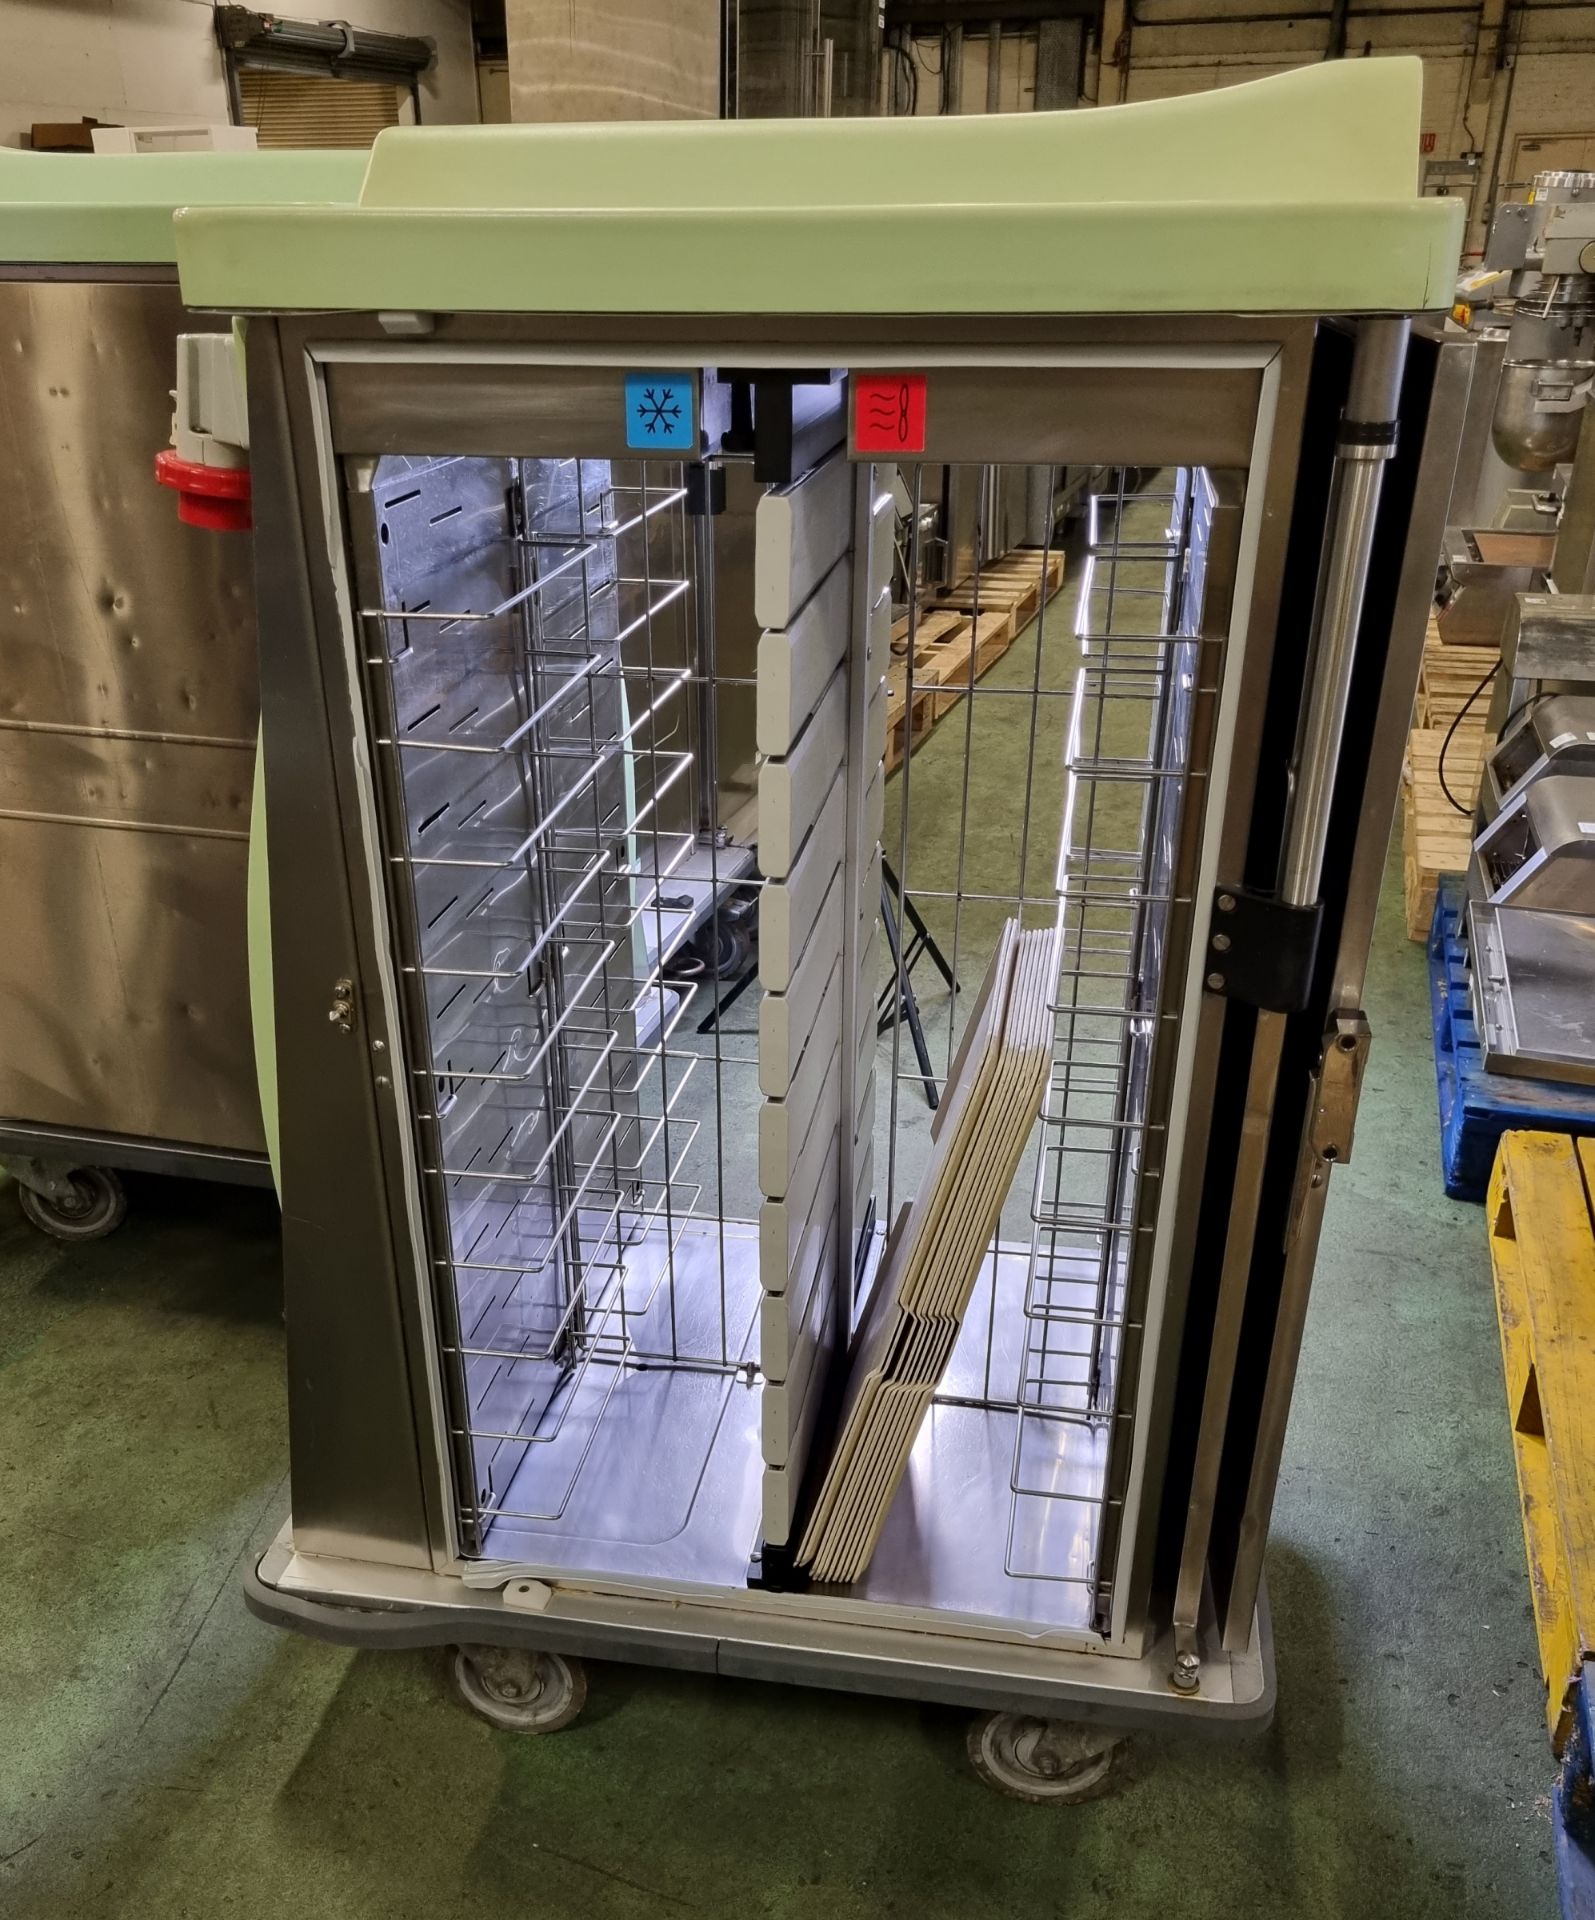 Burlodge RTS hot and cold tray delivery trolley - opens boths sides - W 800 x D 1100 x H 1500mm - Image 2 of 6